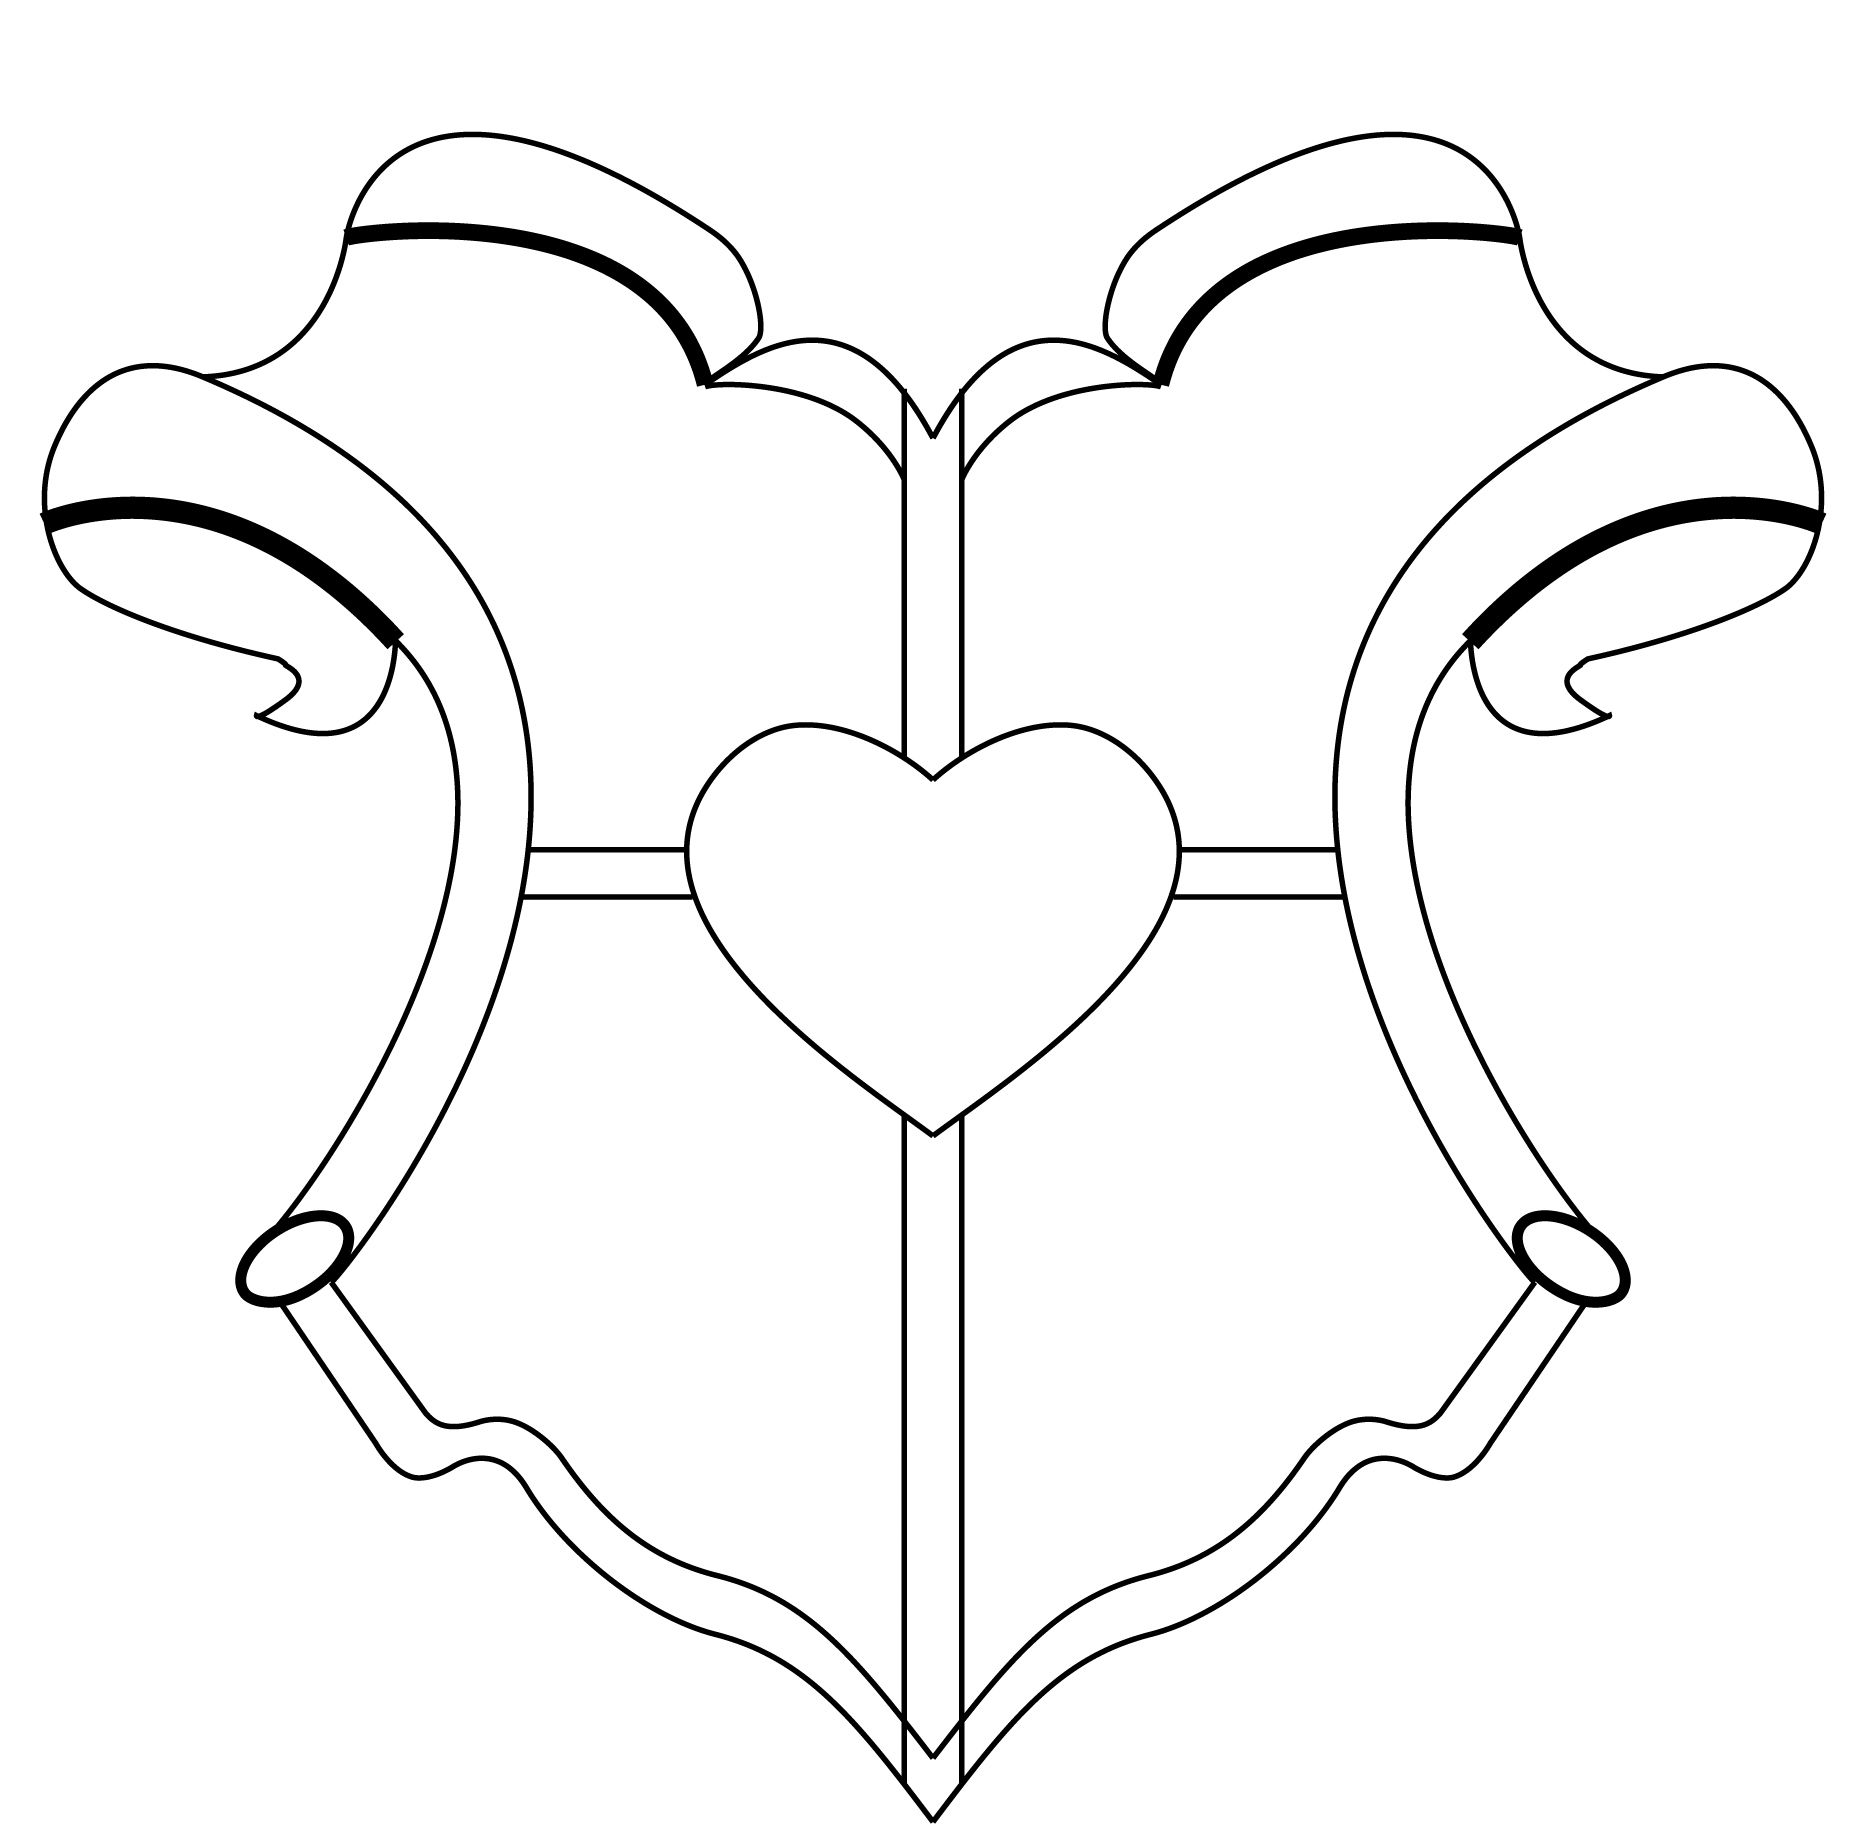 Blank Family Crest Template